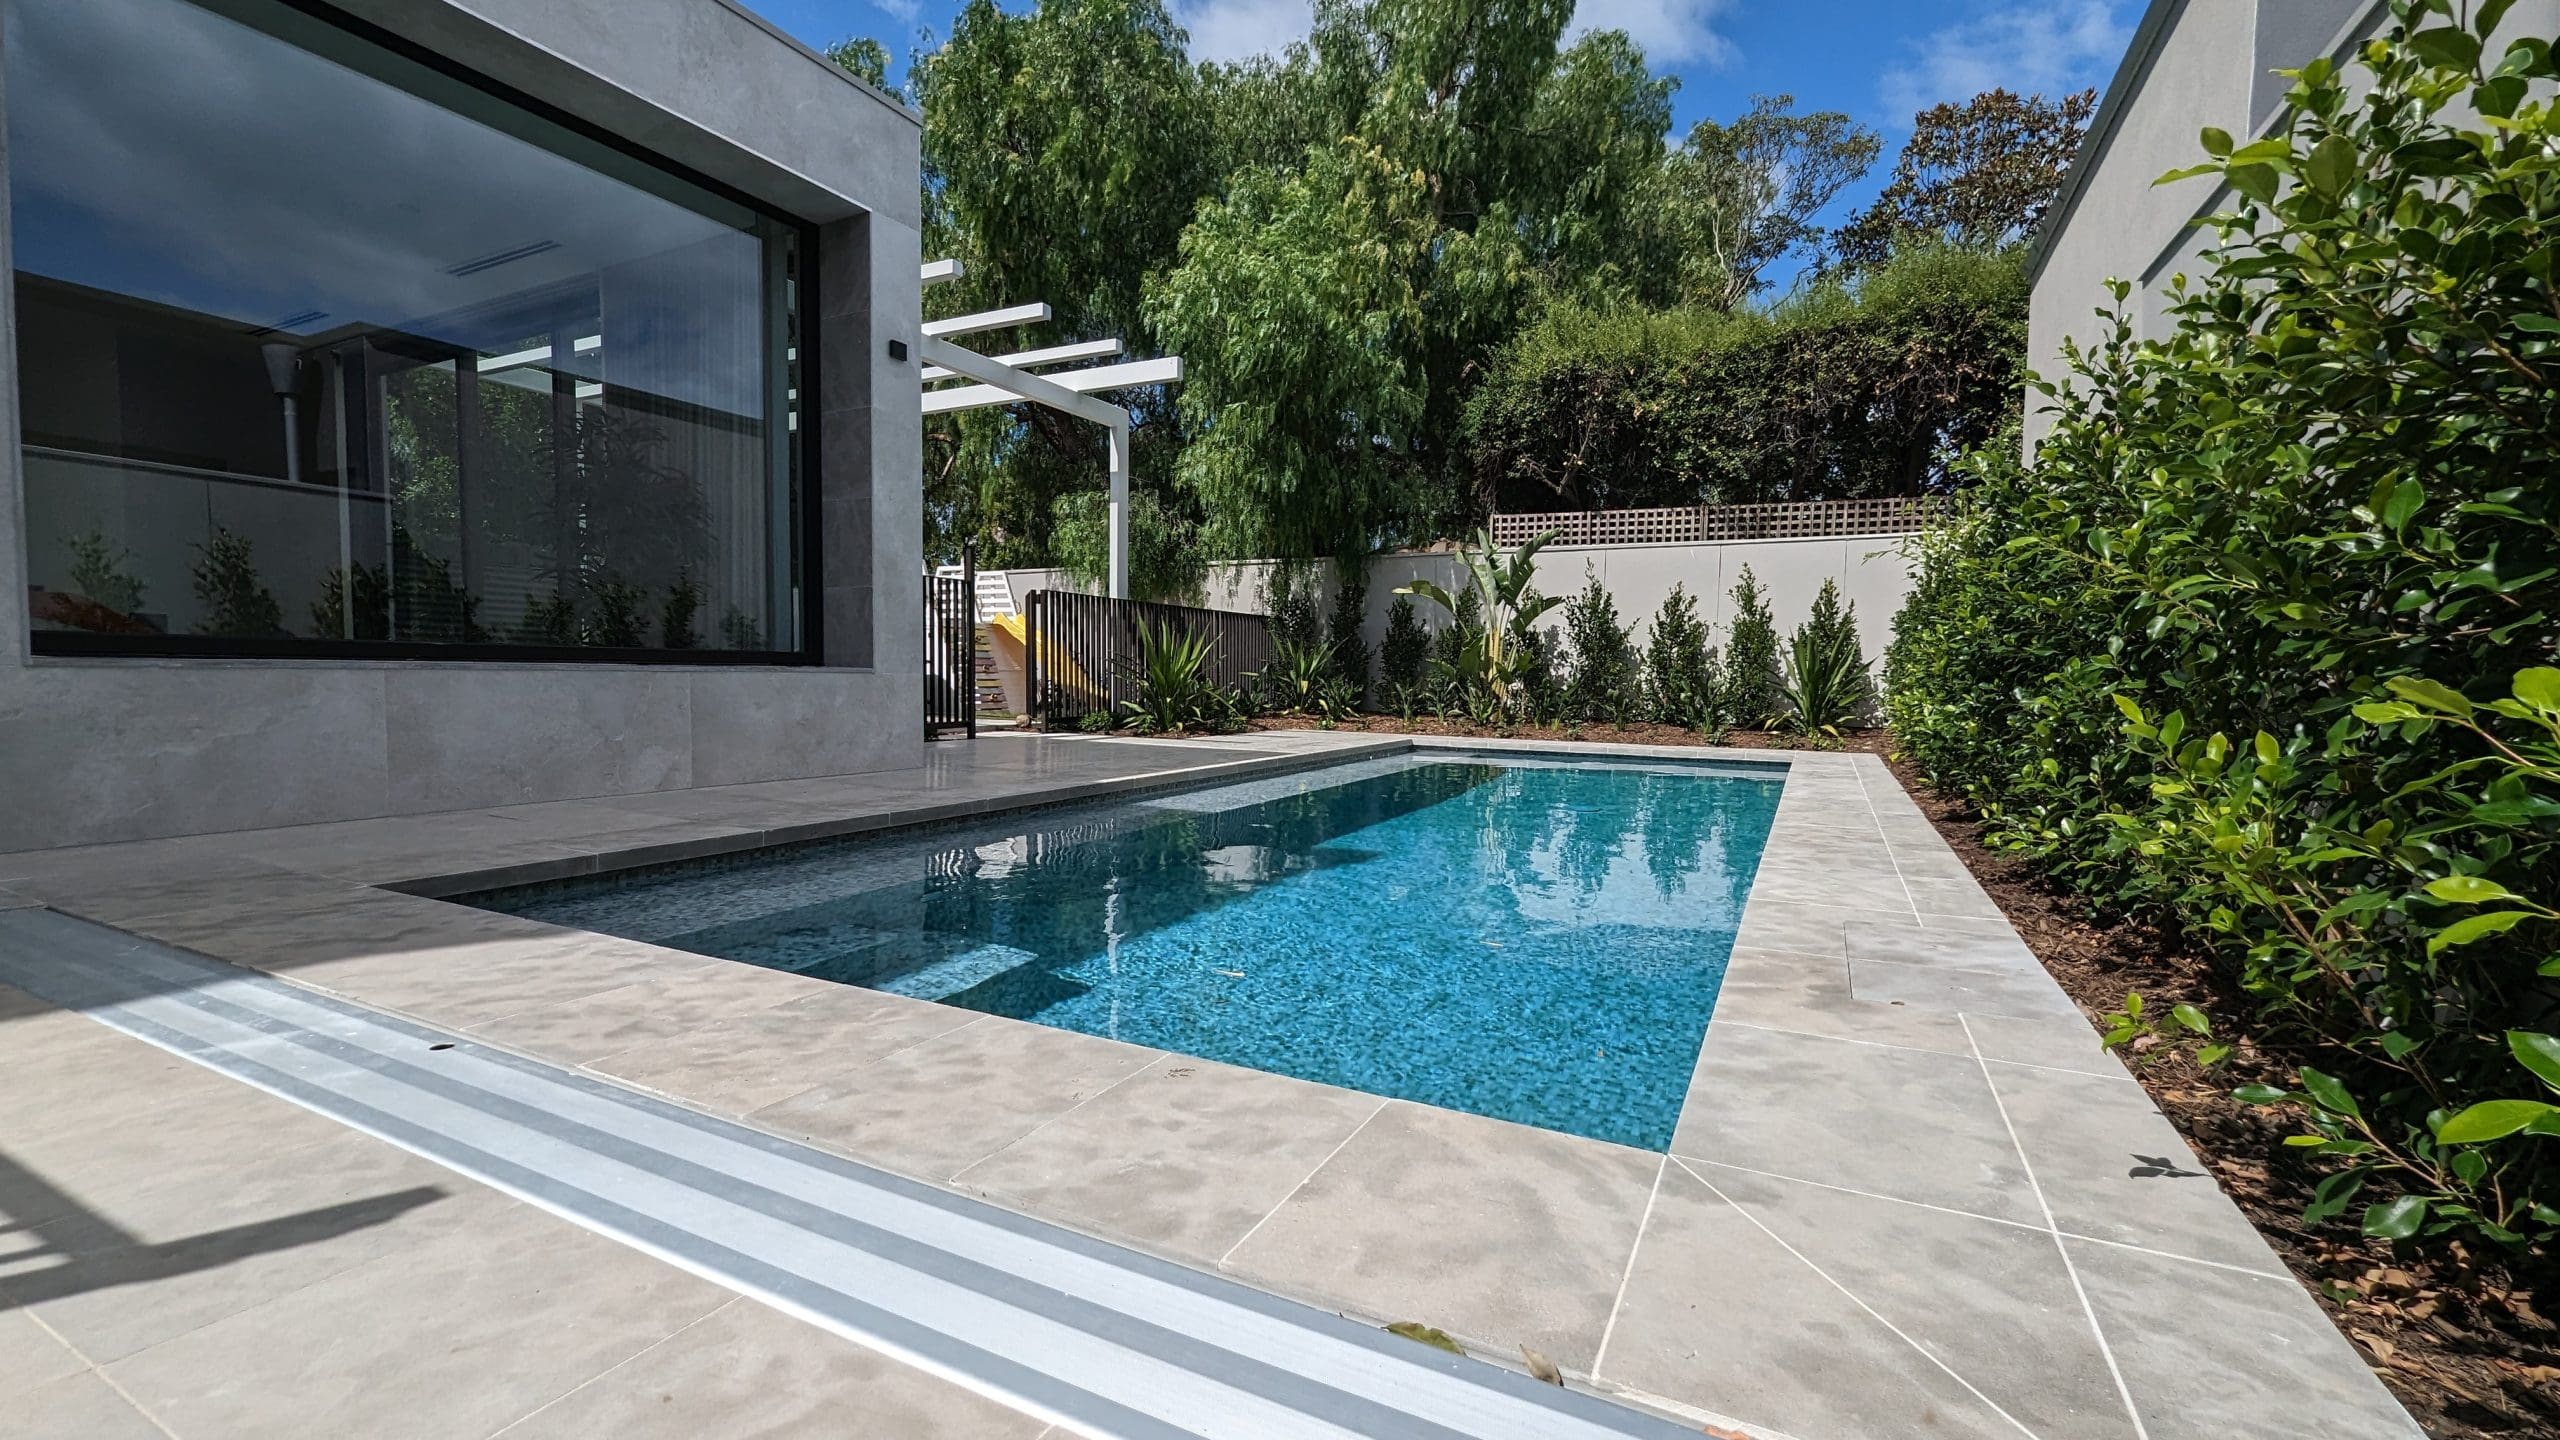 MADDISON BRUSHED & TUMBLED LIMESTONE_RMS TRADERS_NATURAL STONE GREY PAVERS POOL COPING TILES SUPPLIER MELBOURNE (13)